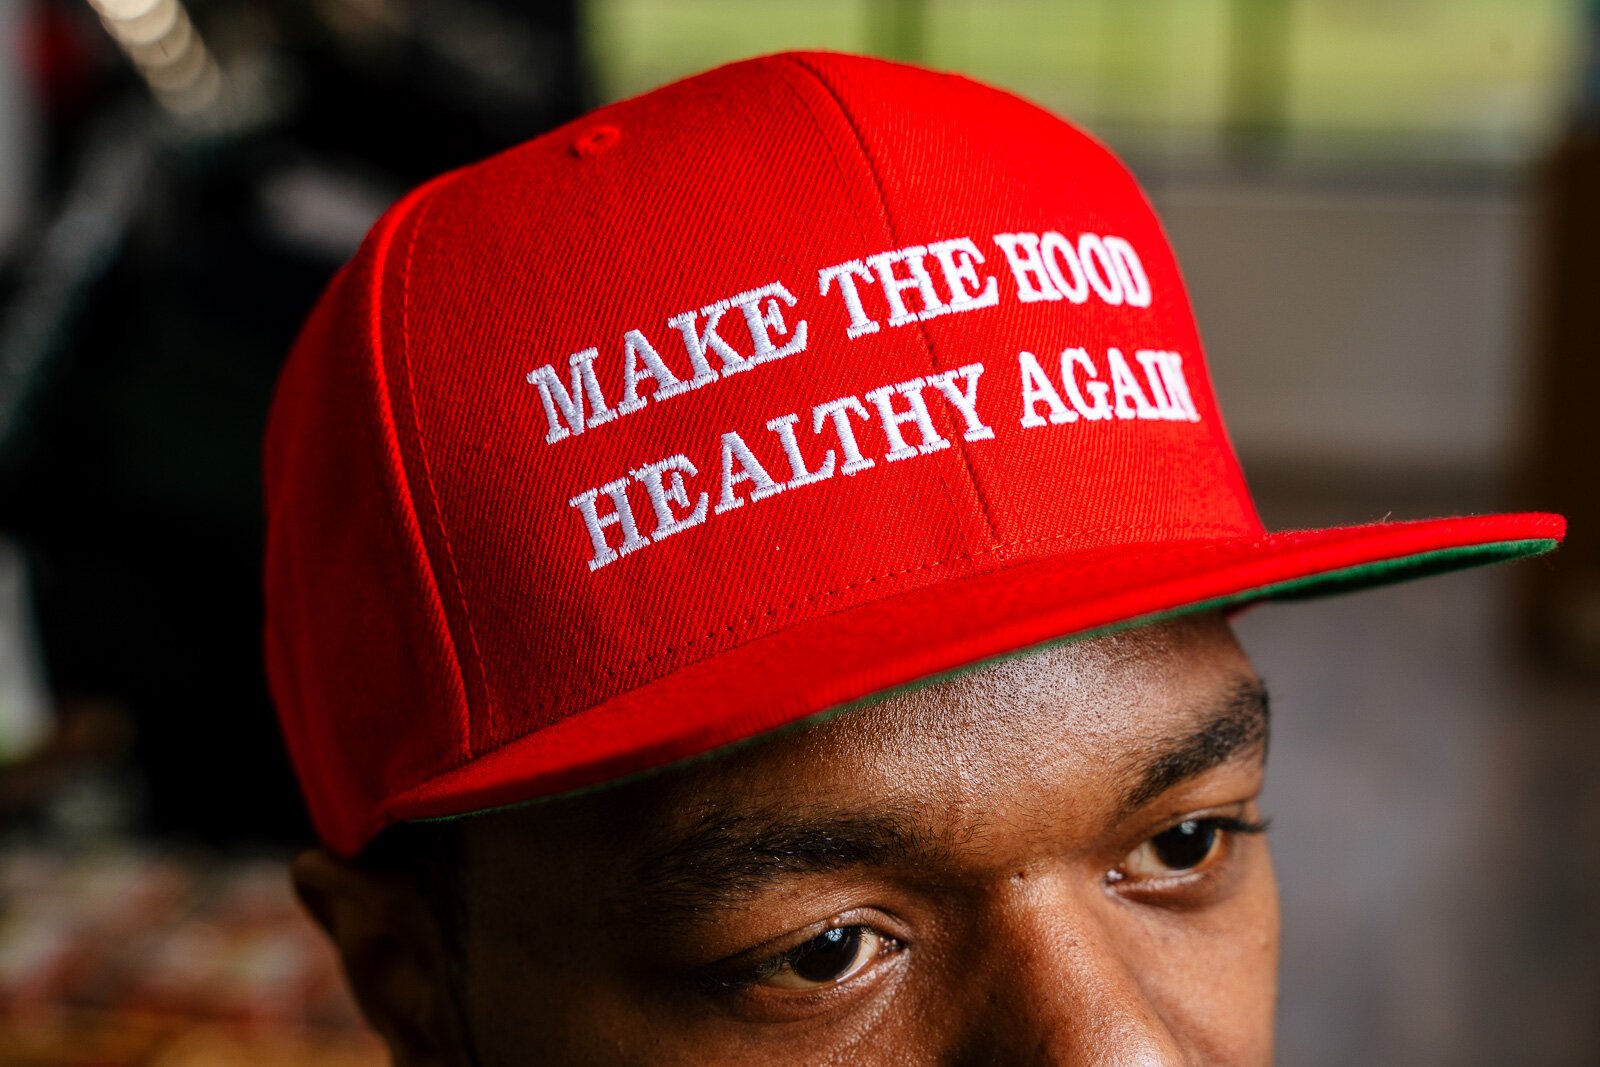 Grimes wears a "Make the Hood Healthy Again" hat, sold at Neighborhood Grocery.